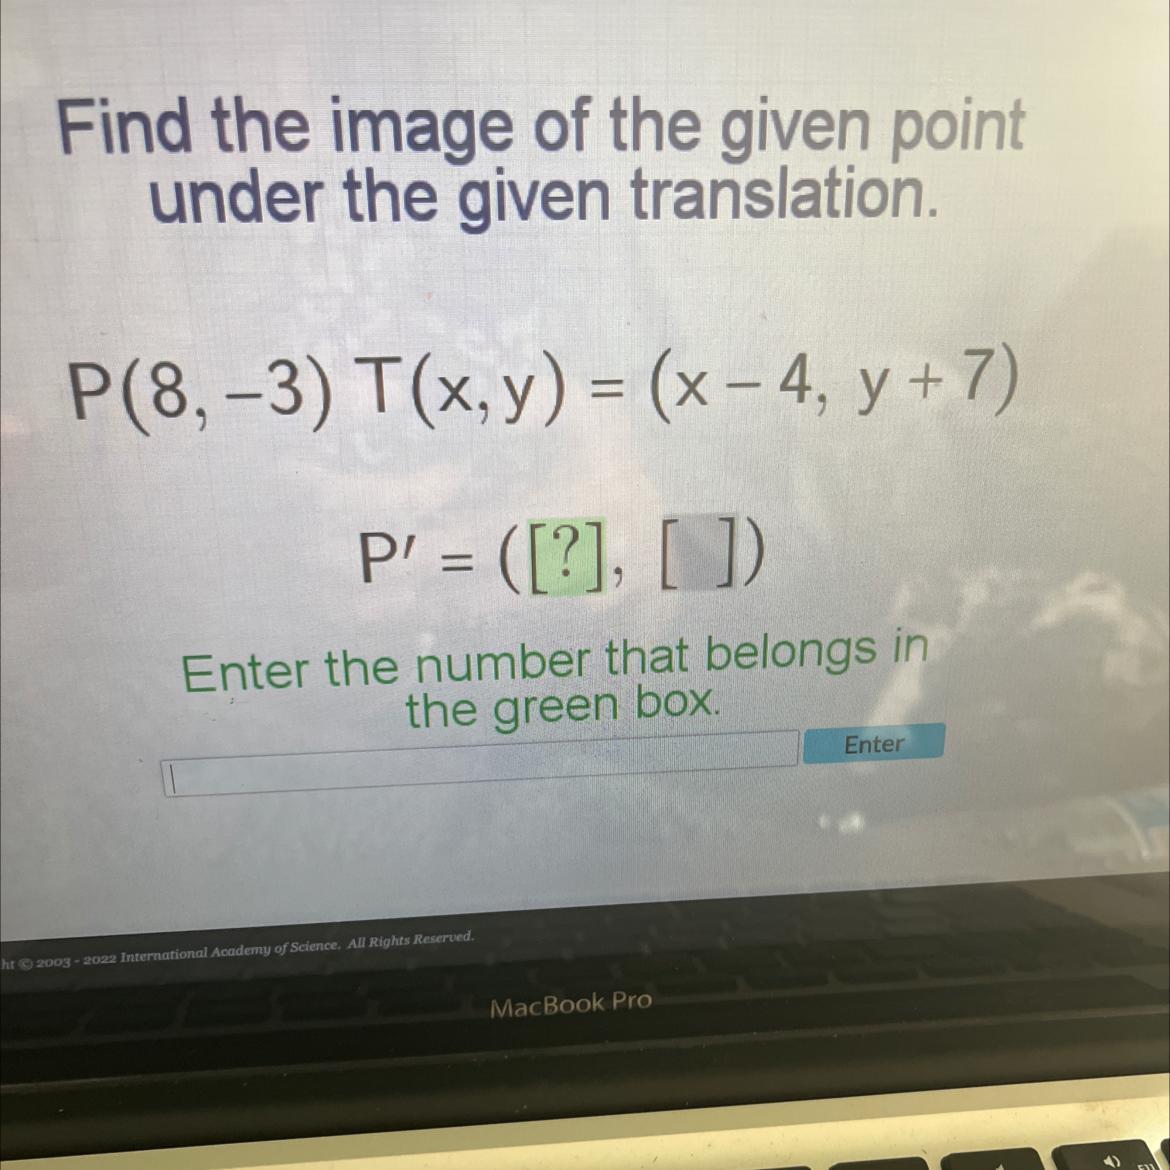 Find The Image Of The Given Pointunder The Given Translation.